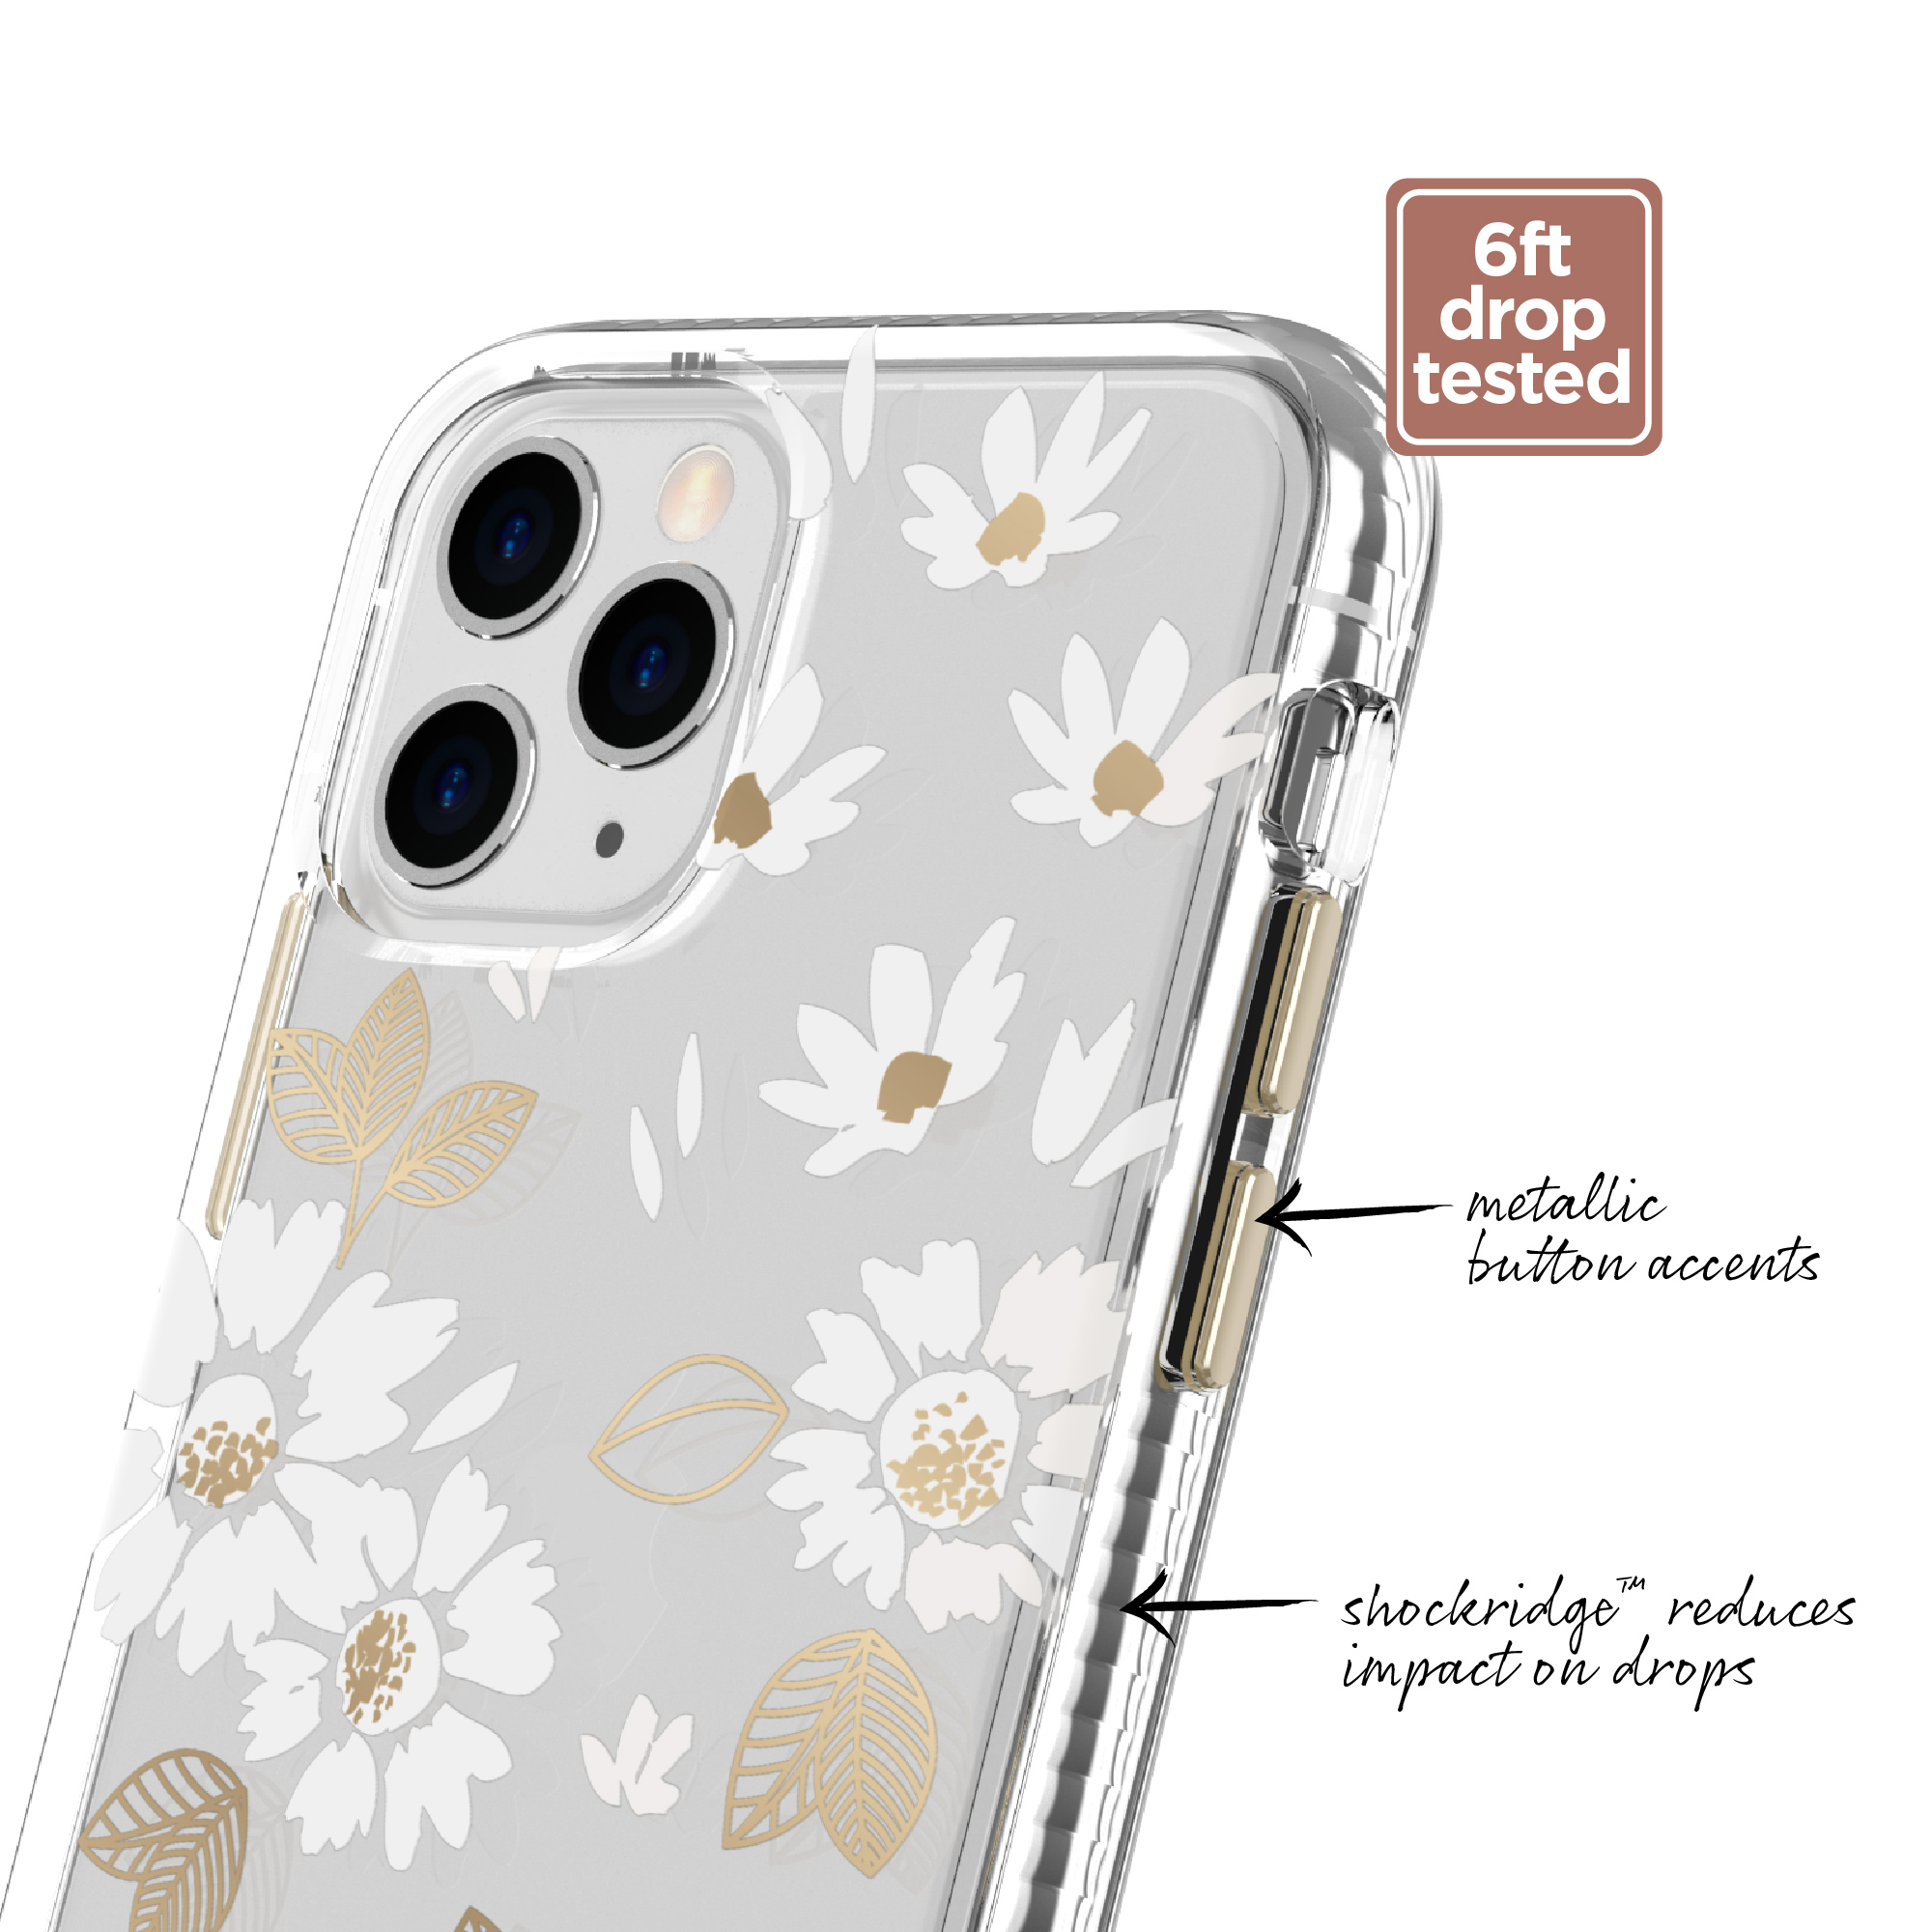 Clear White Floral Phone Case for iPhone 11 Pro - image 2 of 5